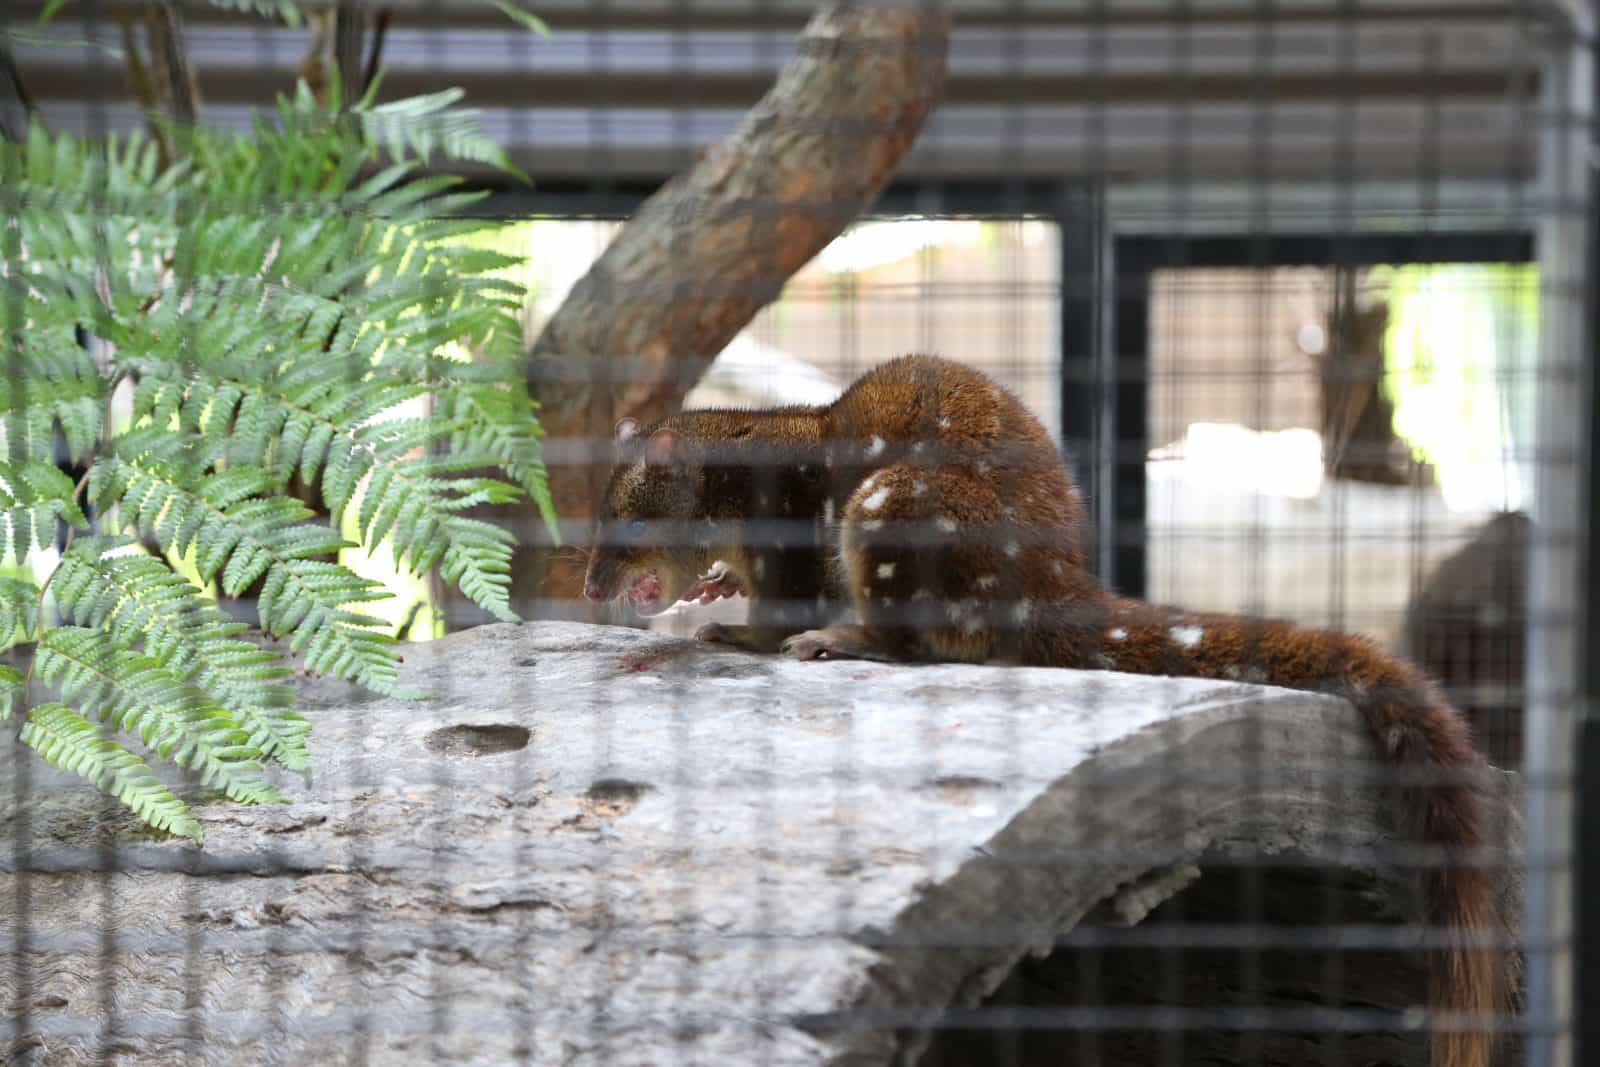 Alexandra Park, Playground and Zoo - Quoll